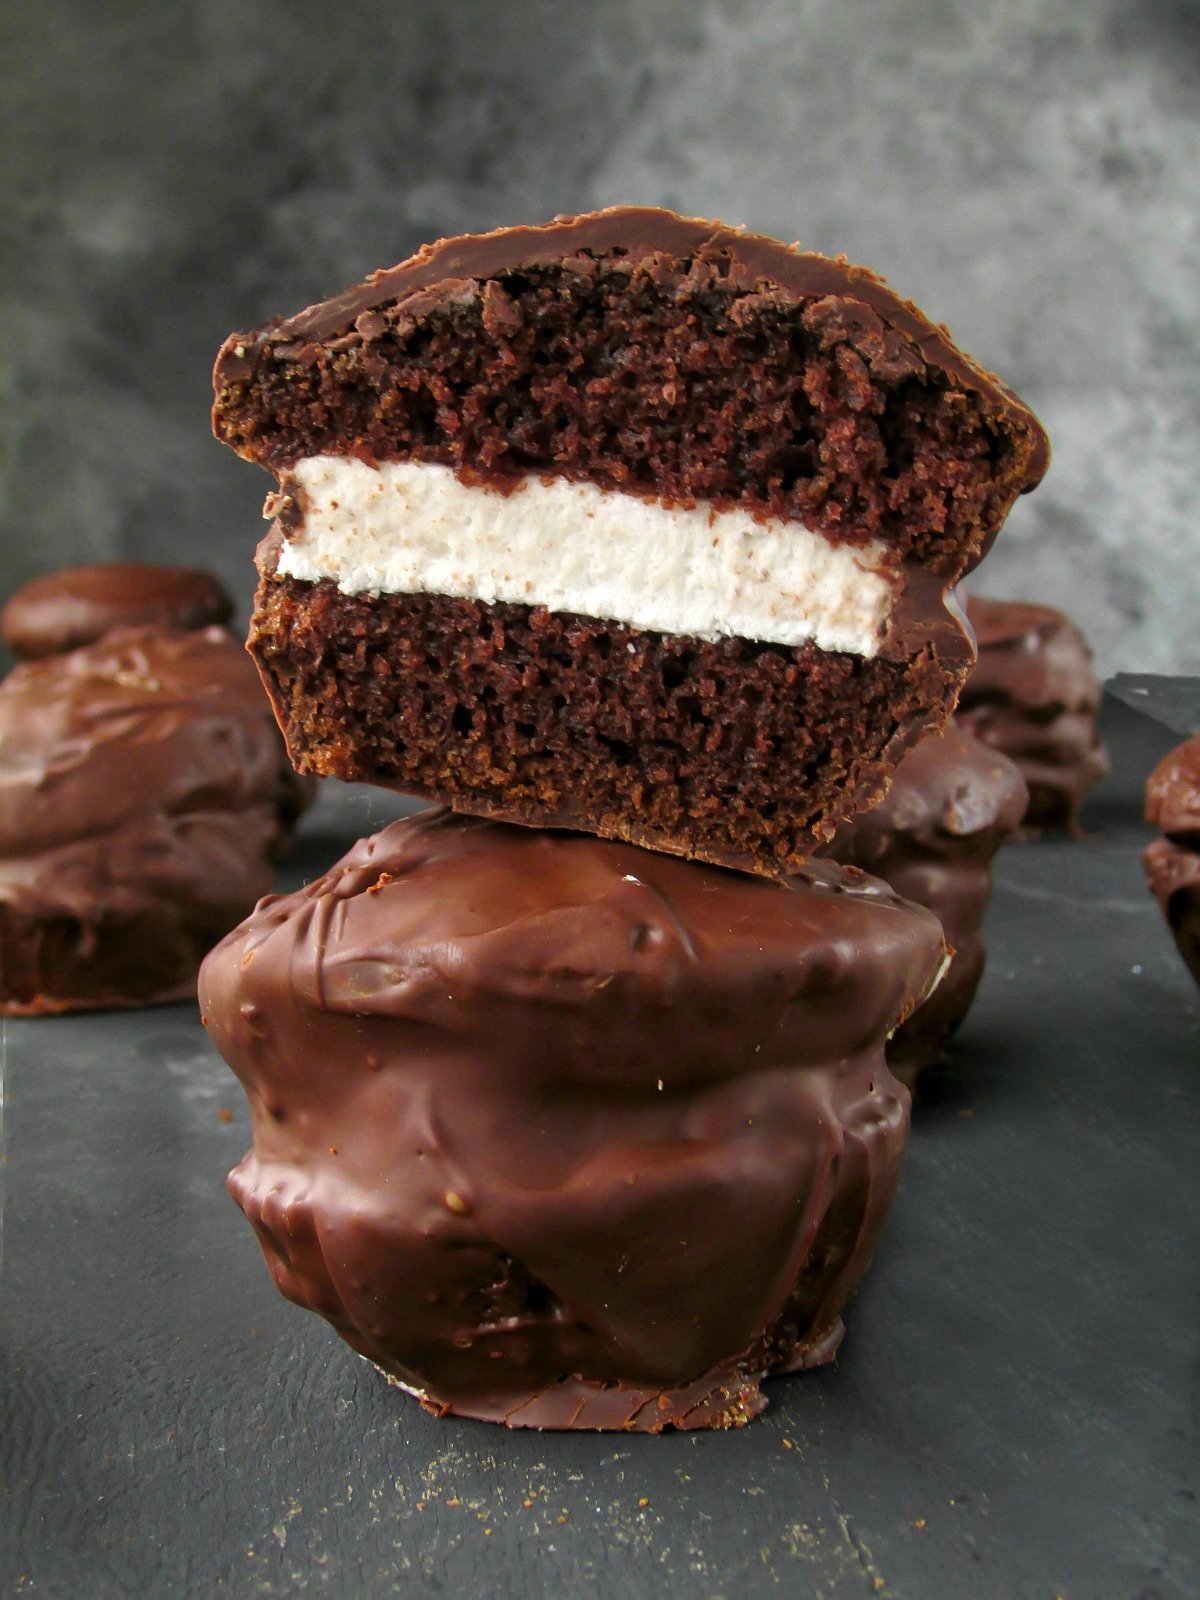 Mallow-Dongs-Chocolate-Covered-Marshmallow-Cupcake-Sliders-5